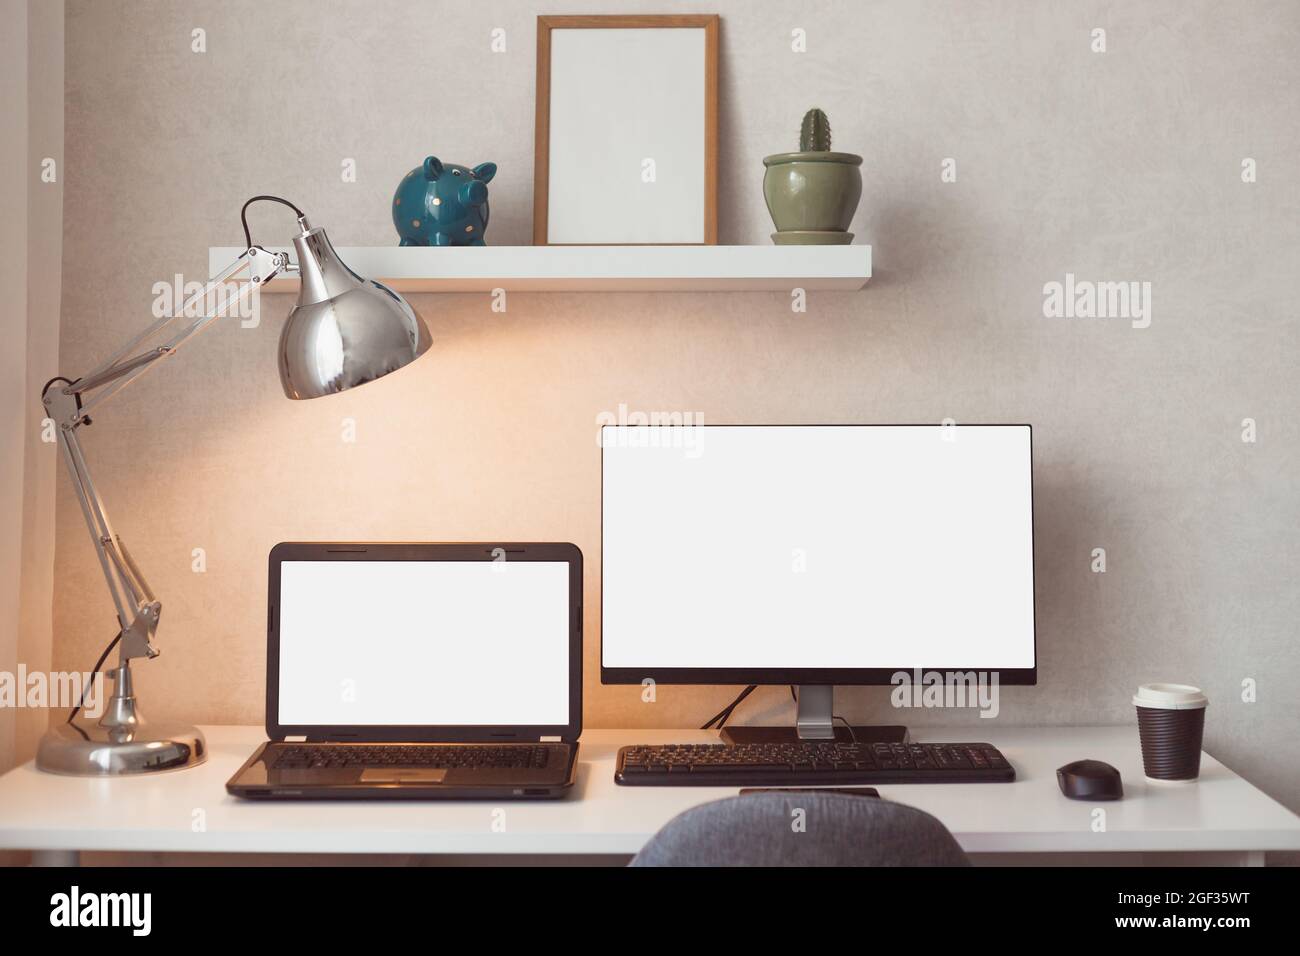 https://c8.alamy.com/comp/2GF35WT/computer-and-laptop-with-blank-white-screens-mockup-design-desktop-computer-in-office-on-white-table-with-keyboard-work-place-concept-cactus-in-pot-2GF35WT.jpg